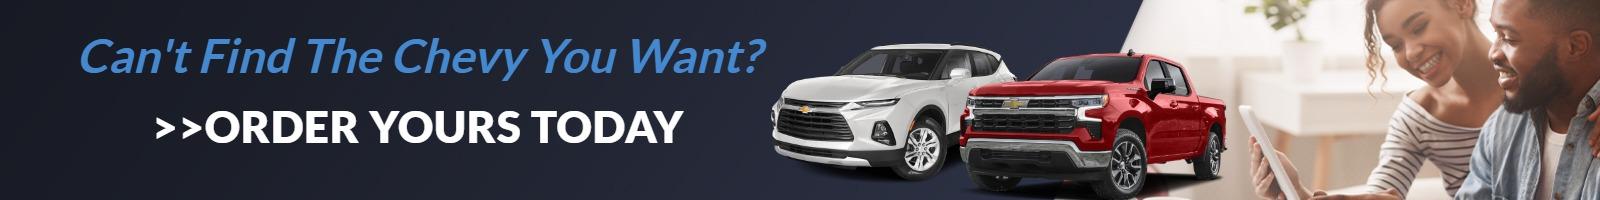 Can't Find The New Chevy You Want? Order Yours Today.